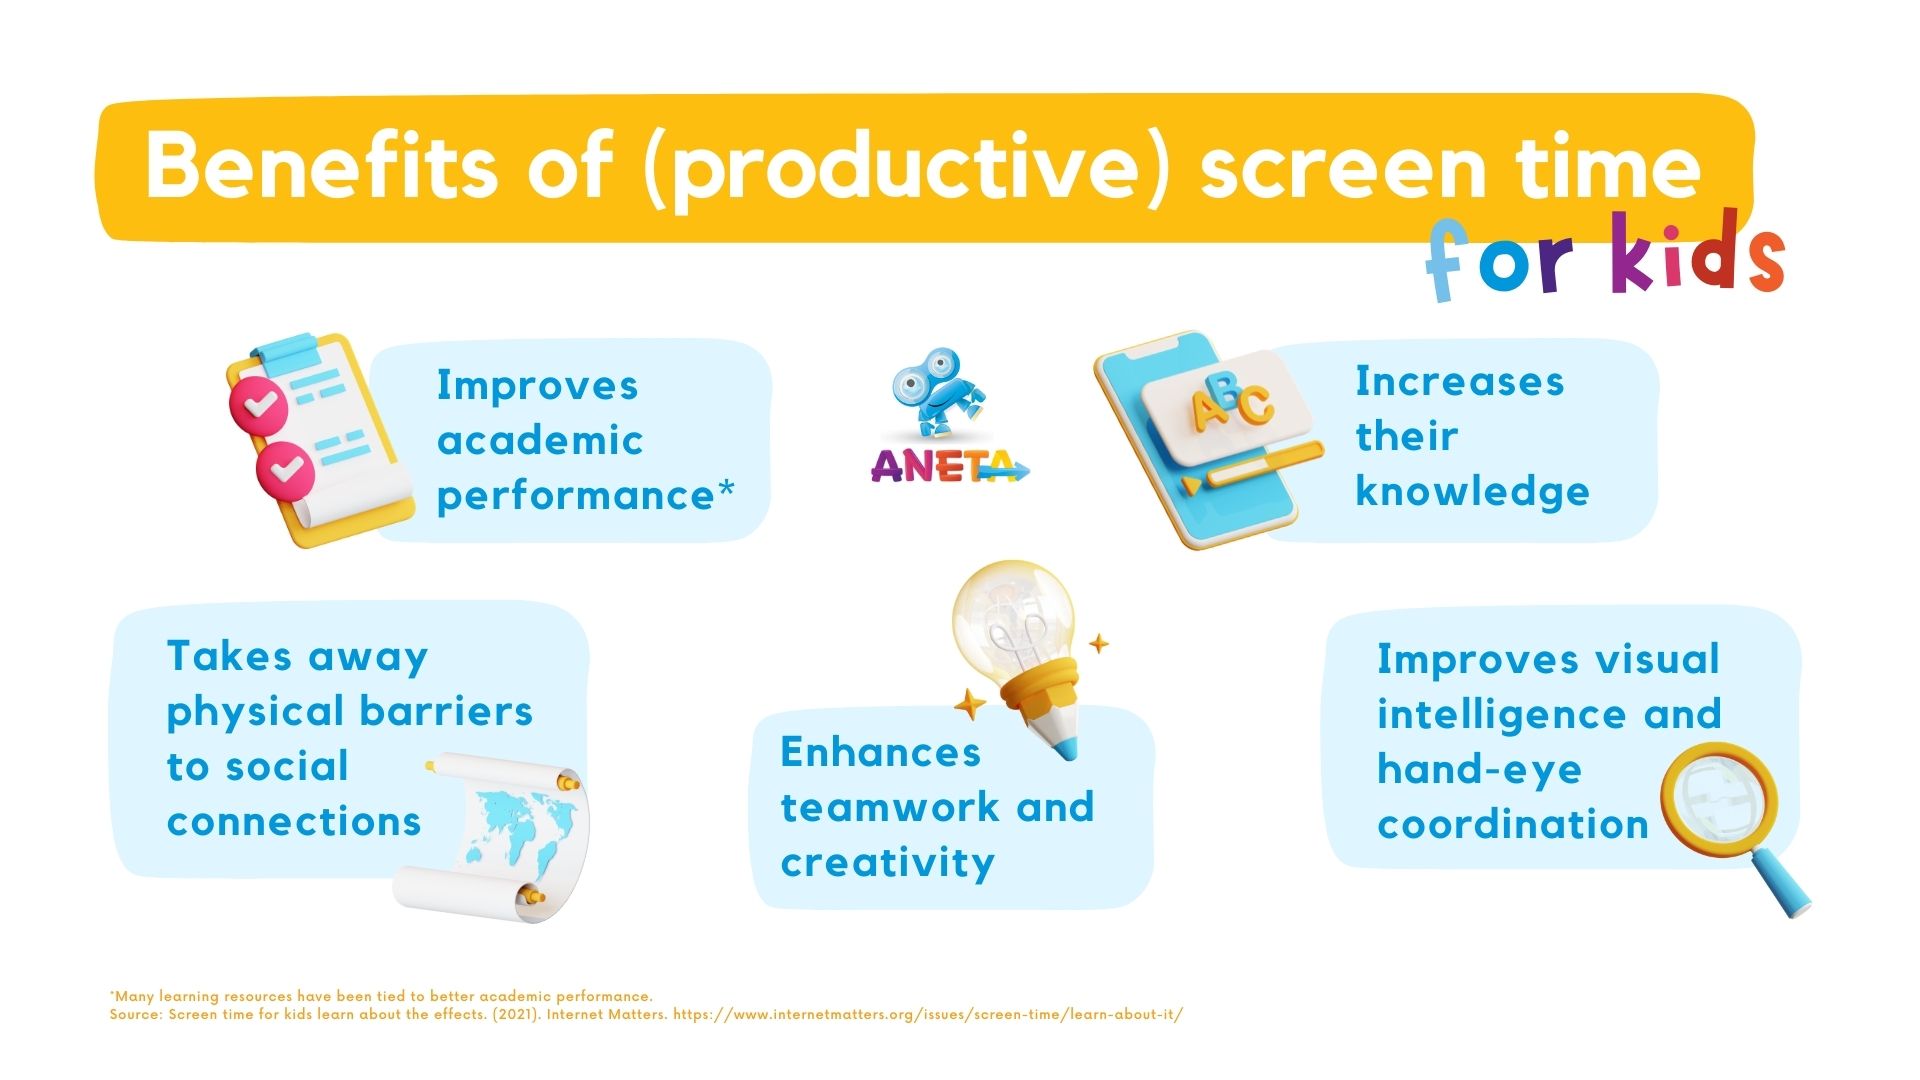 Benefits of productive screen time for kids